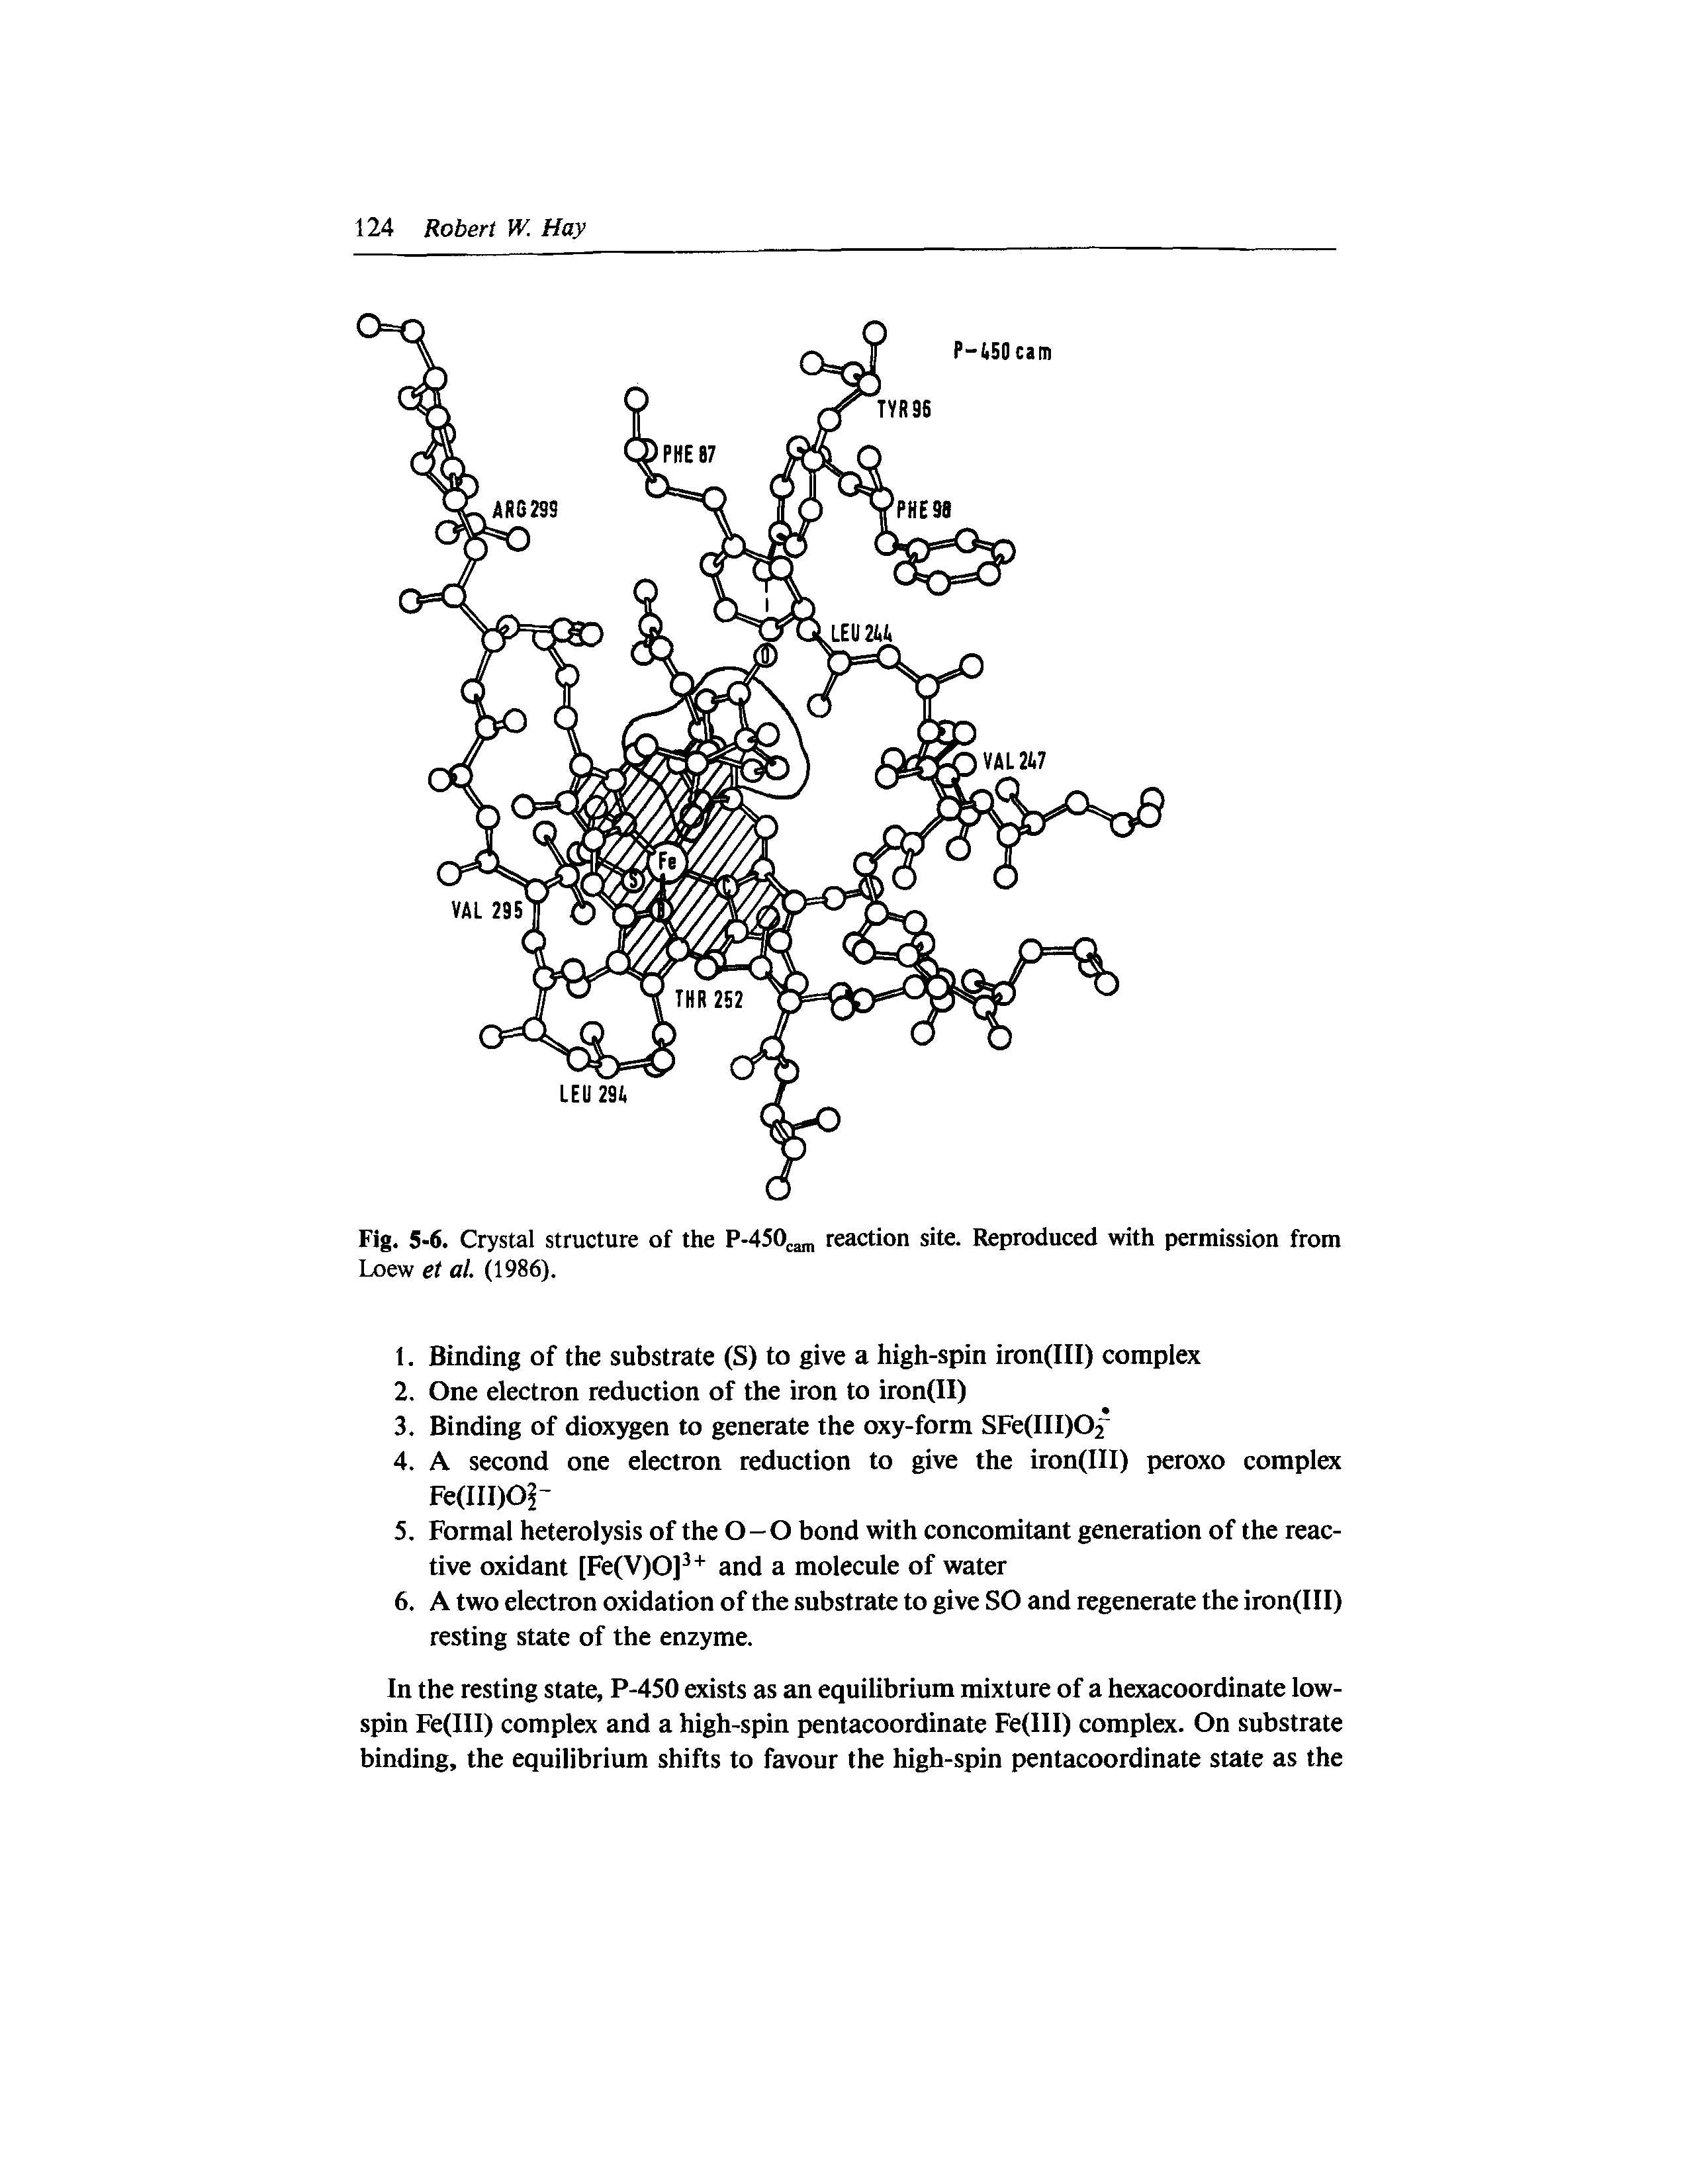 Fig. 5-6. Crystal structure of the P-450cam reaction site. Reproduced with permission from Loew et at. (1986).